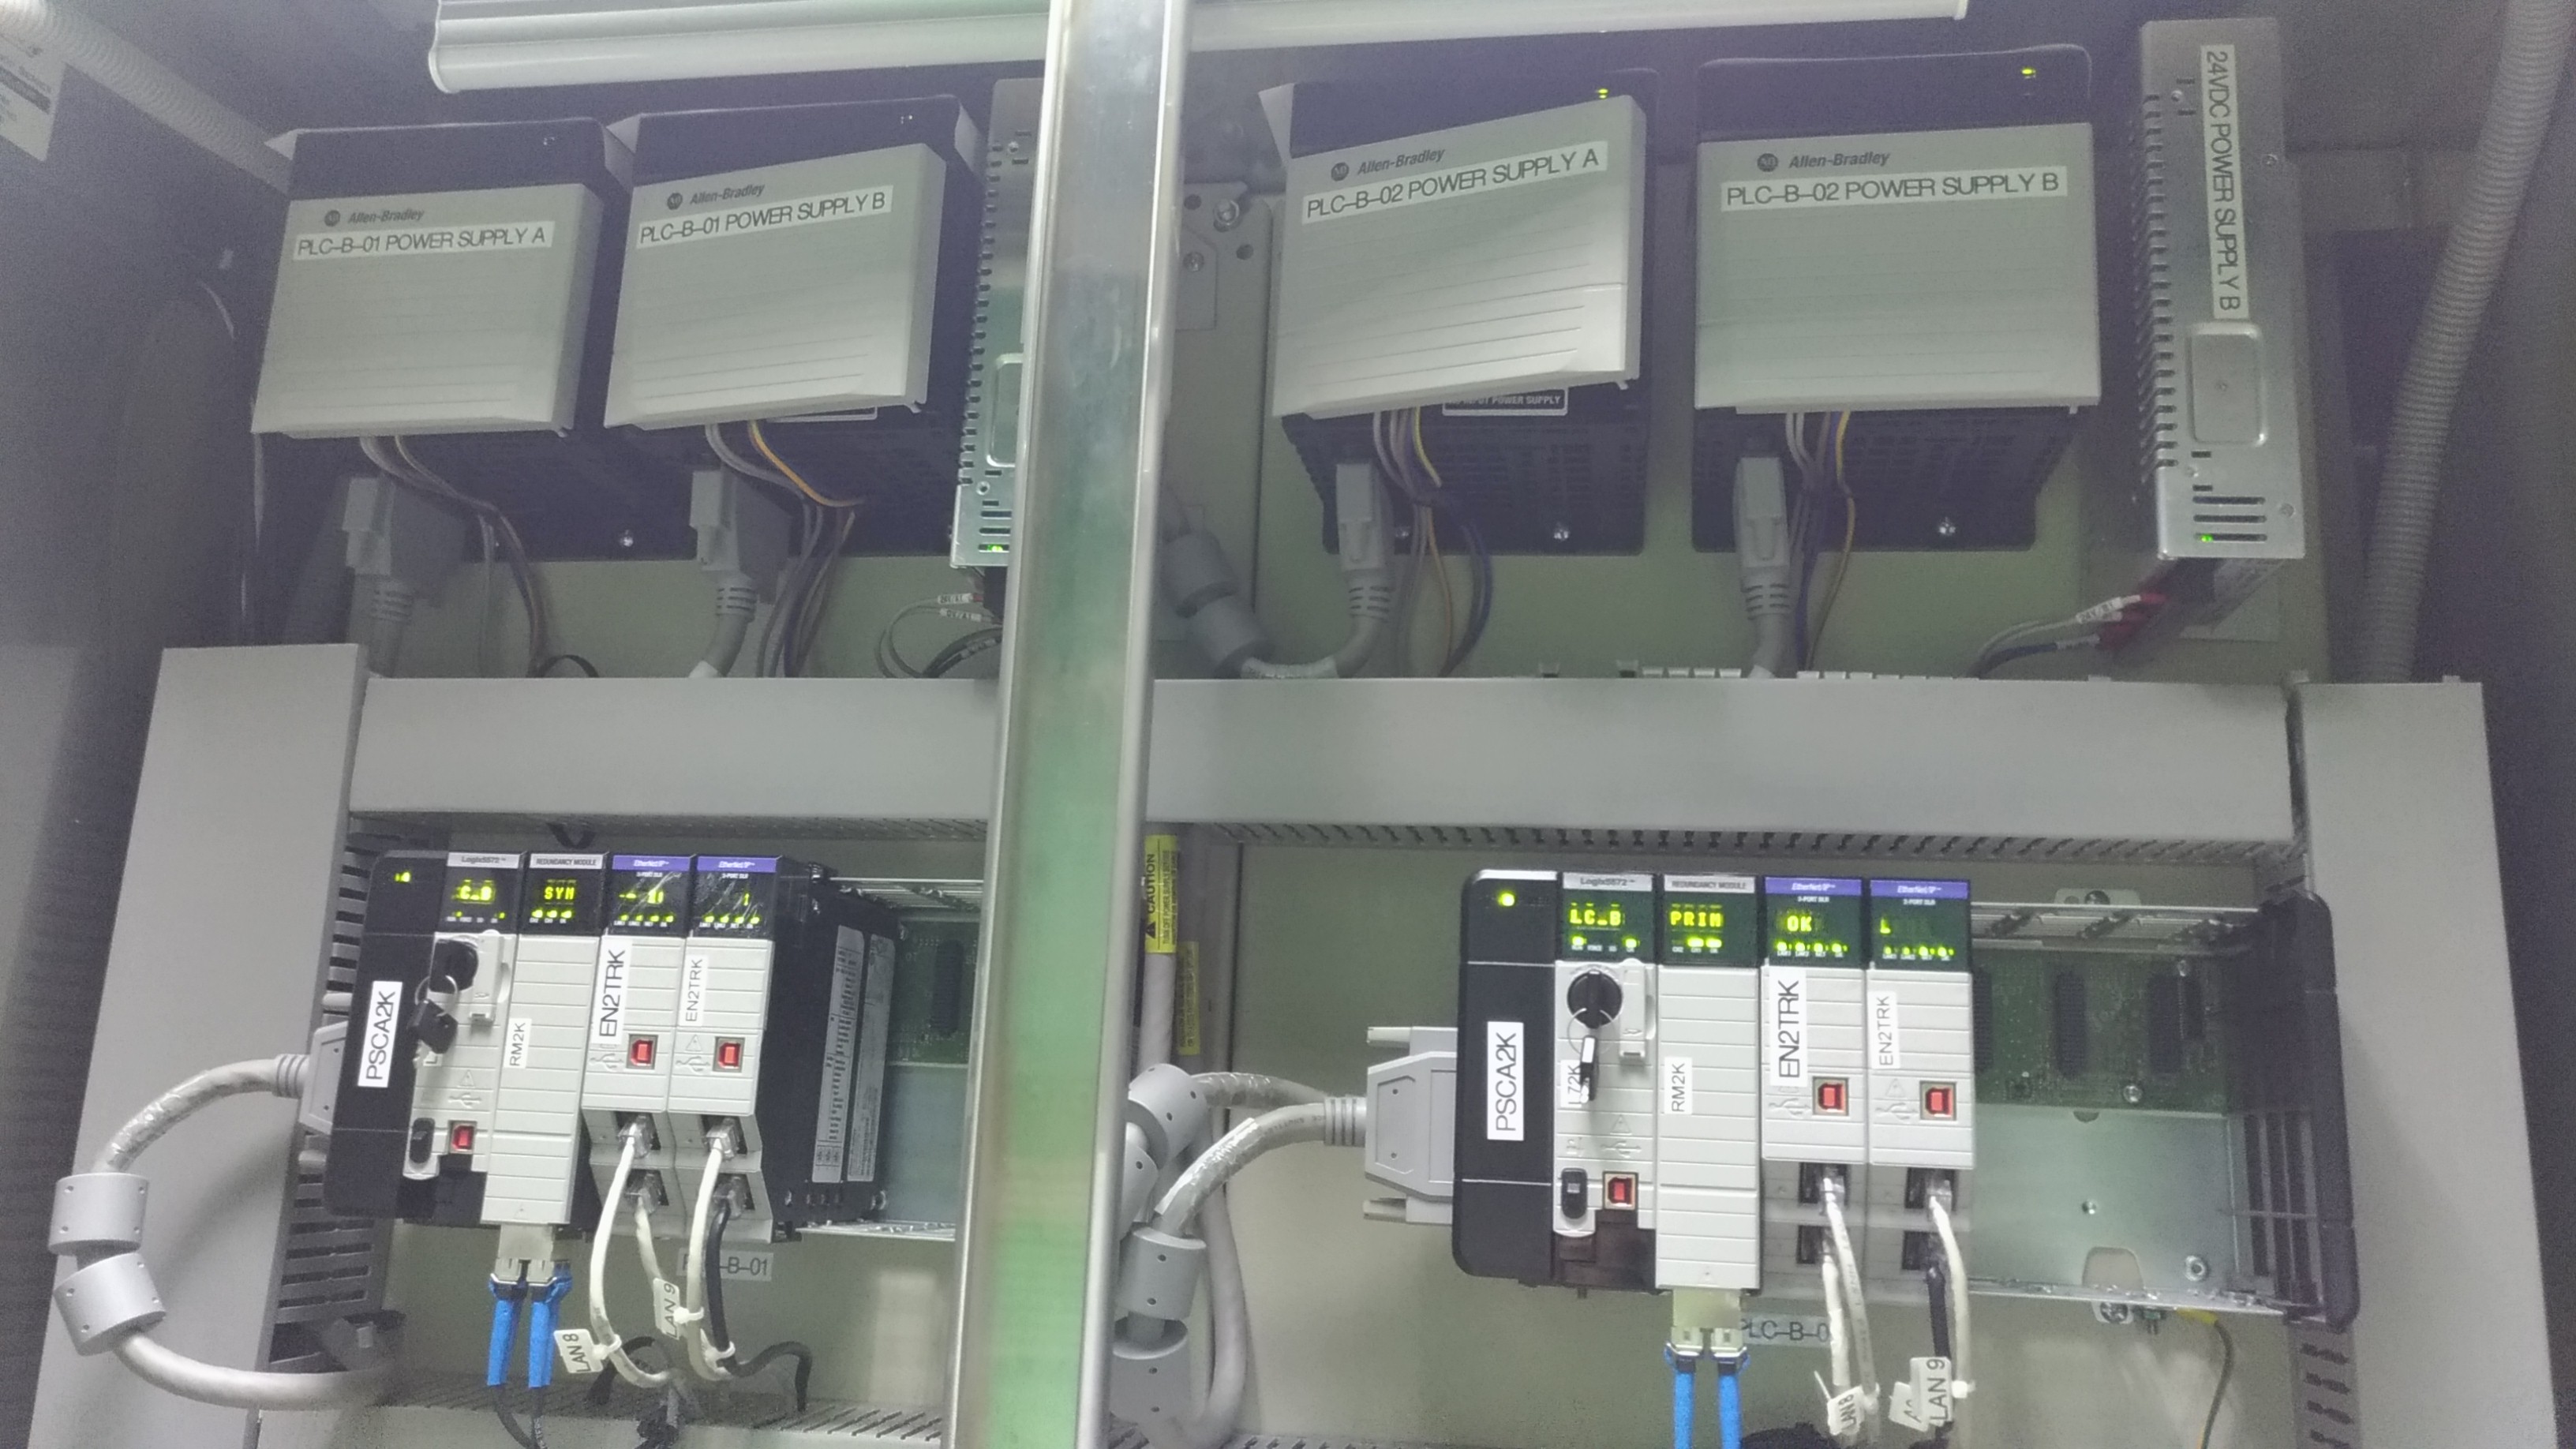 Installed Redundant PLC Rack Power Supply and PLC Rack inside the new PLC Panel After Works in DSD Stanley STW (Typical)